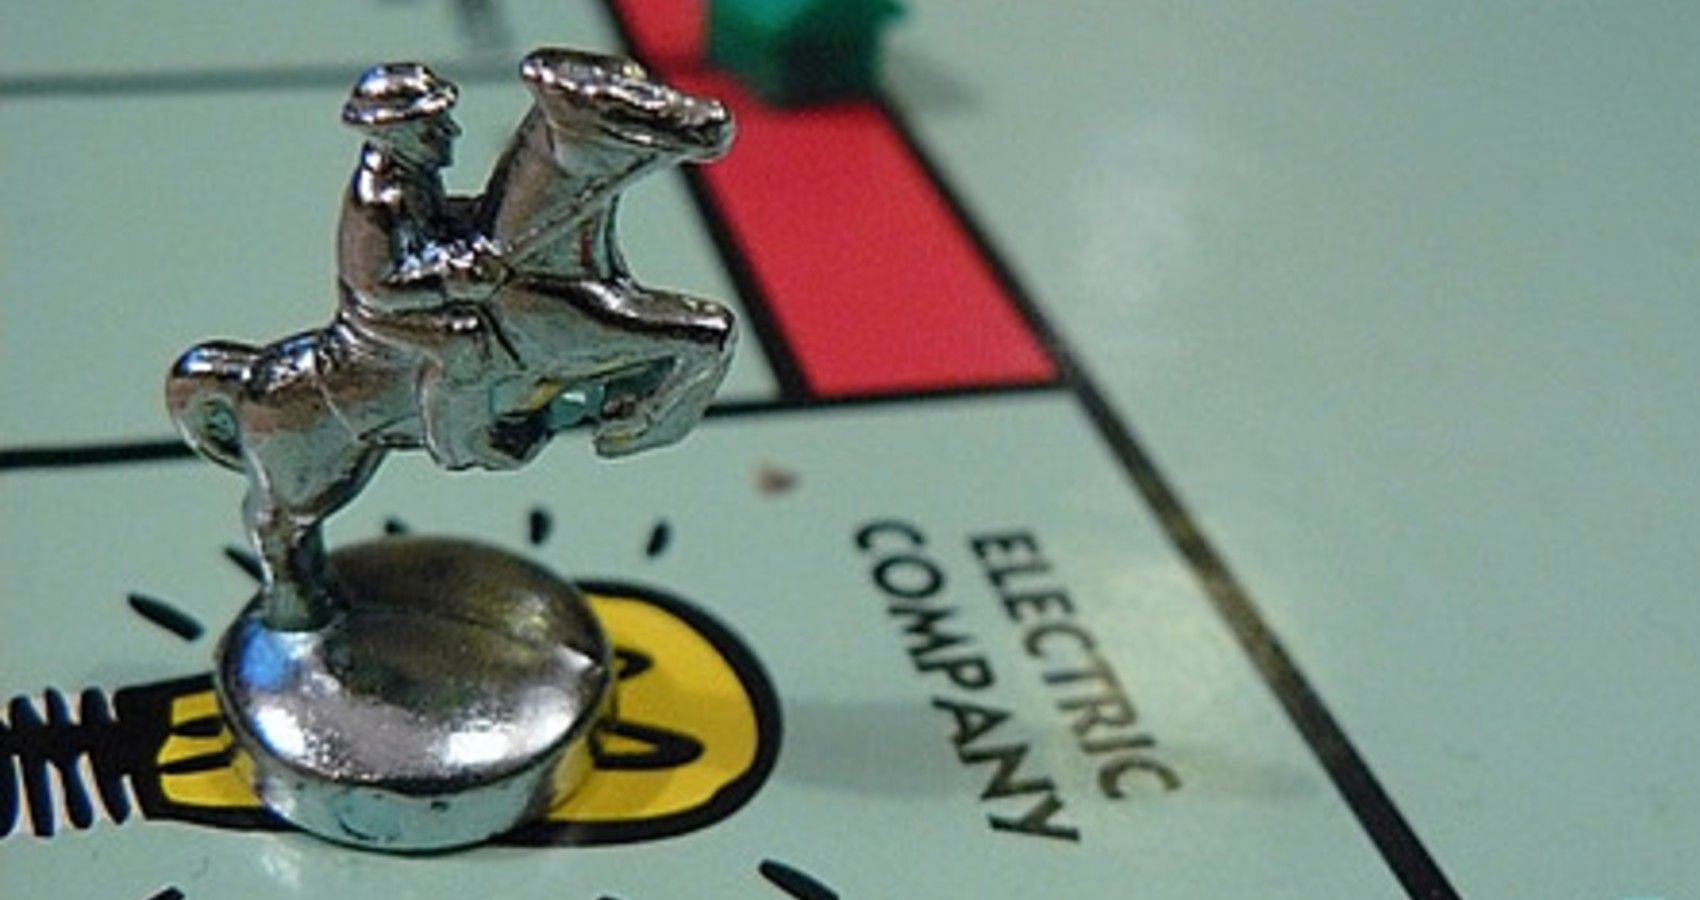 A close up of a monopoly board